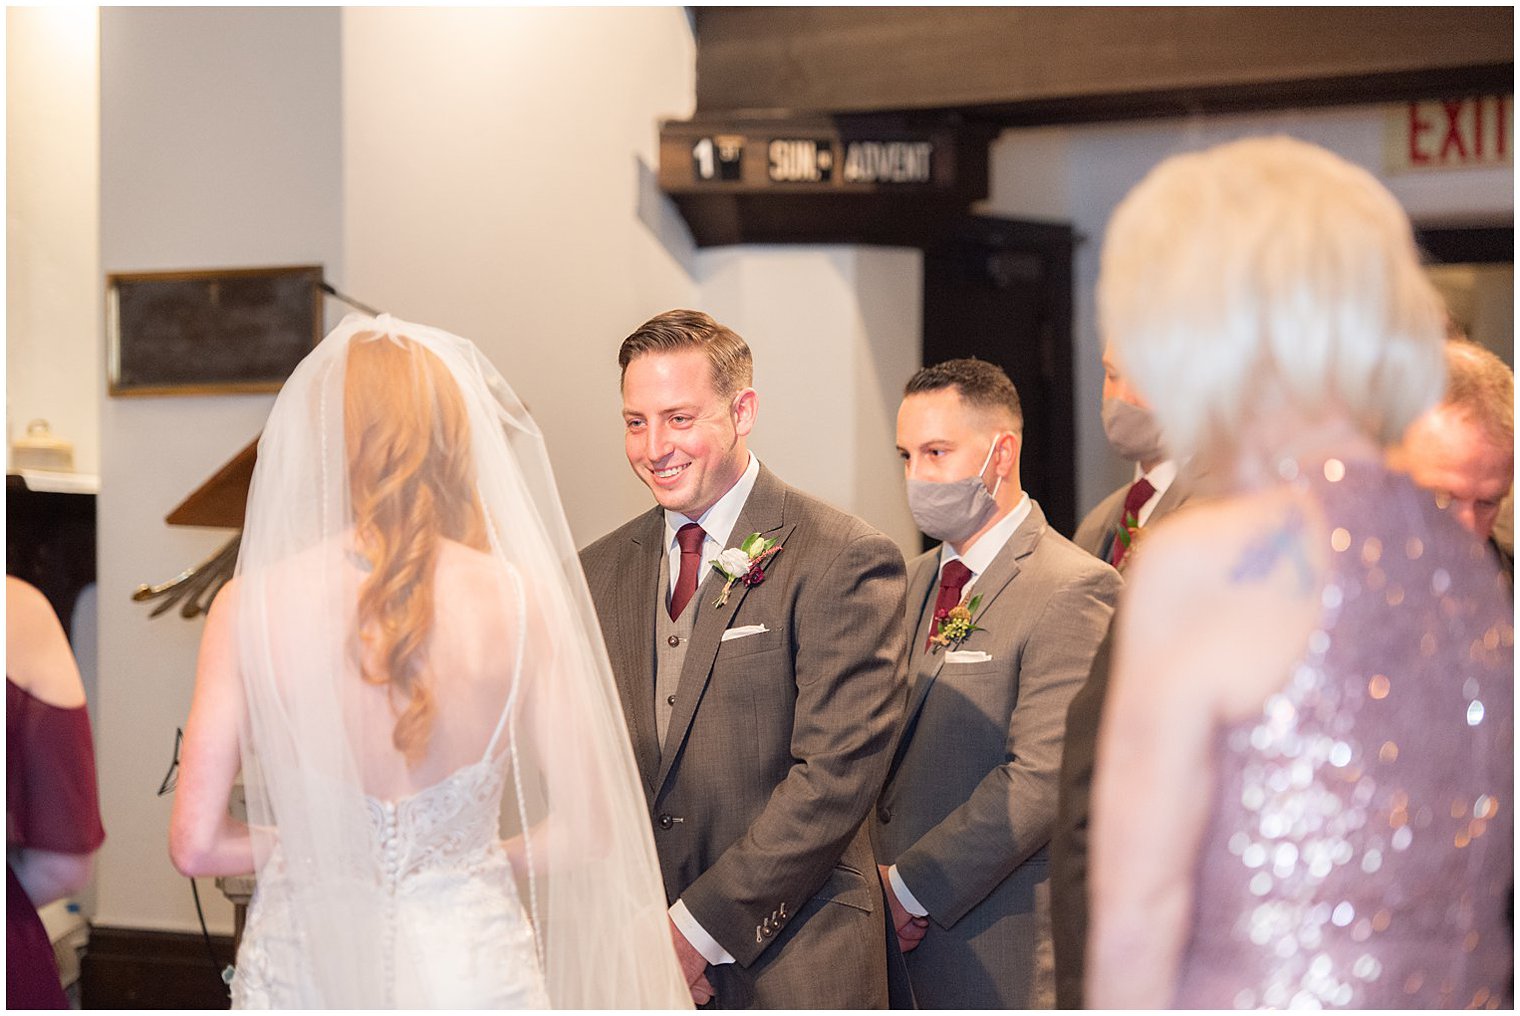 traditional church wedding ceremony at Grace Episcopal Church in Nutley